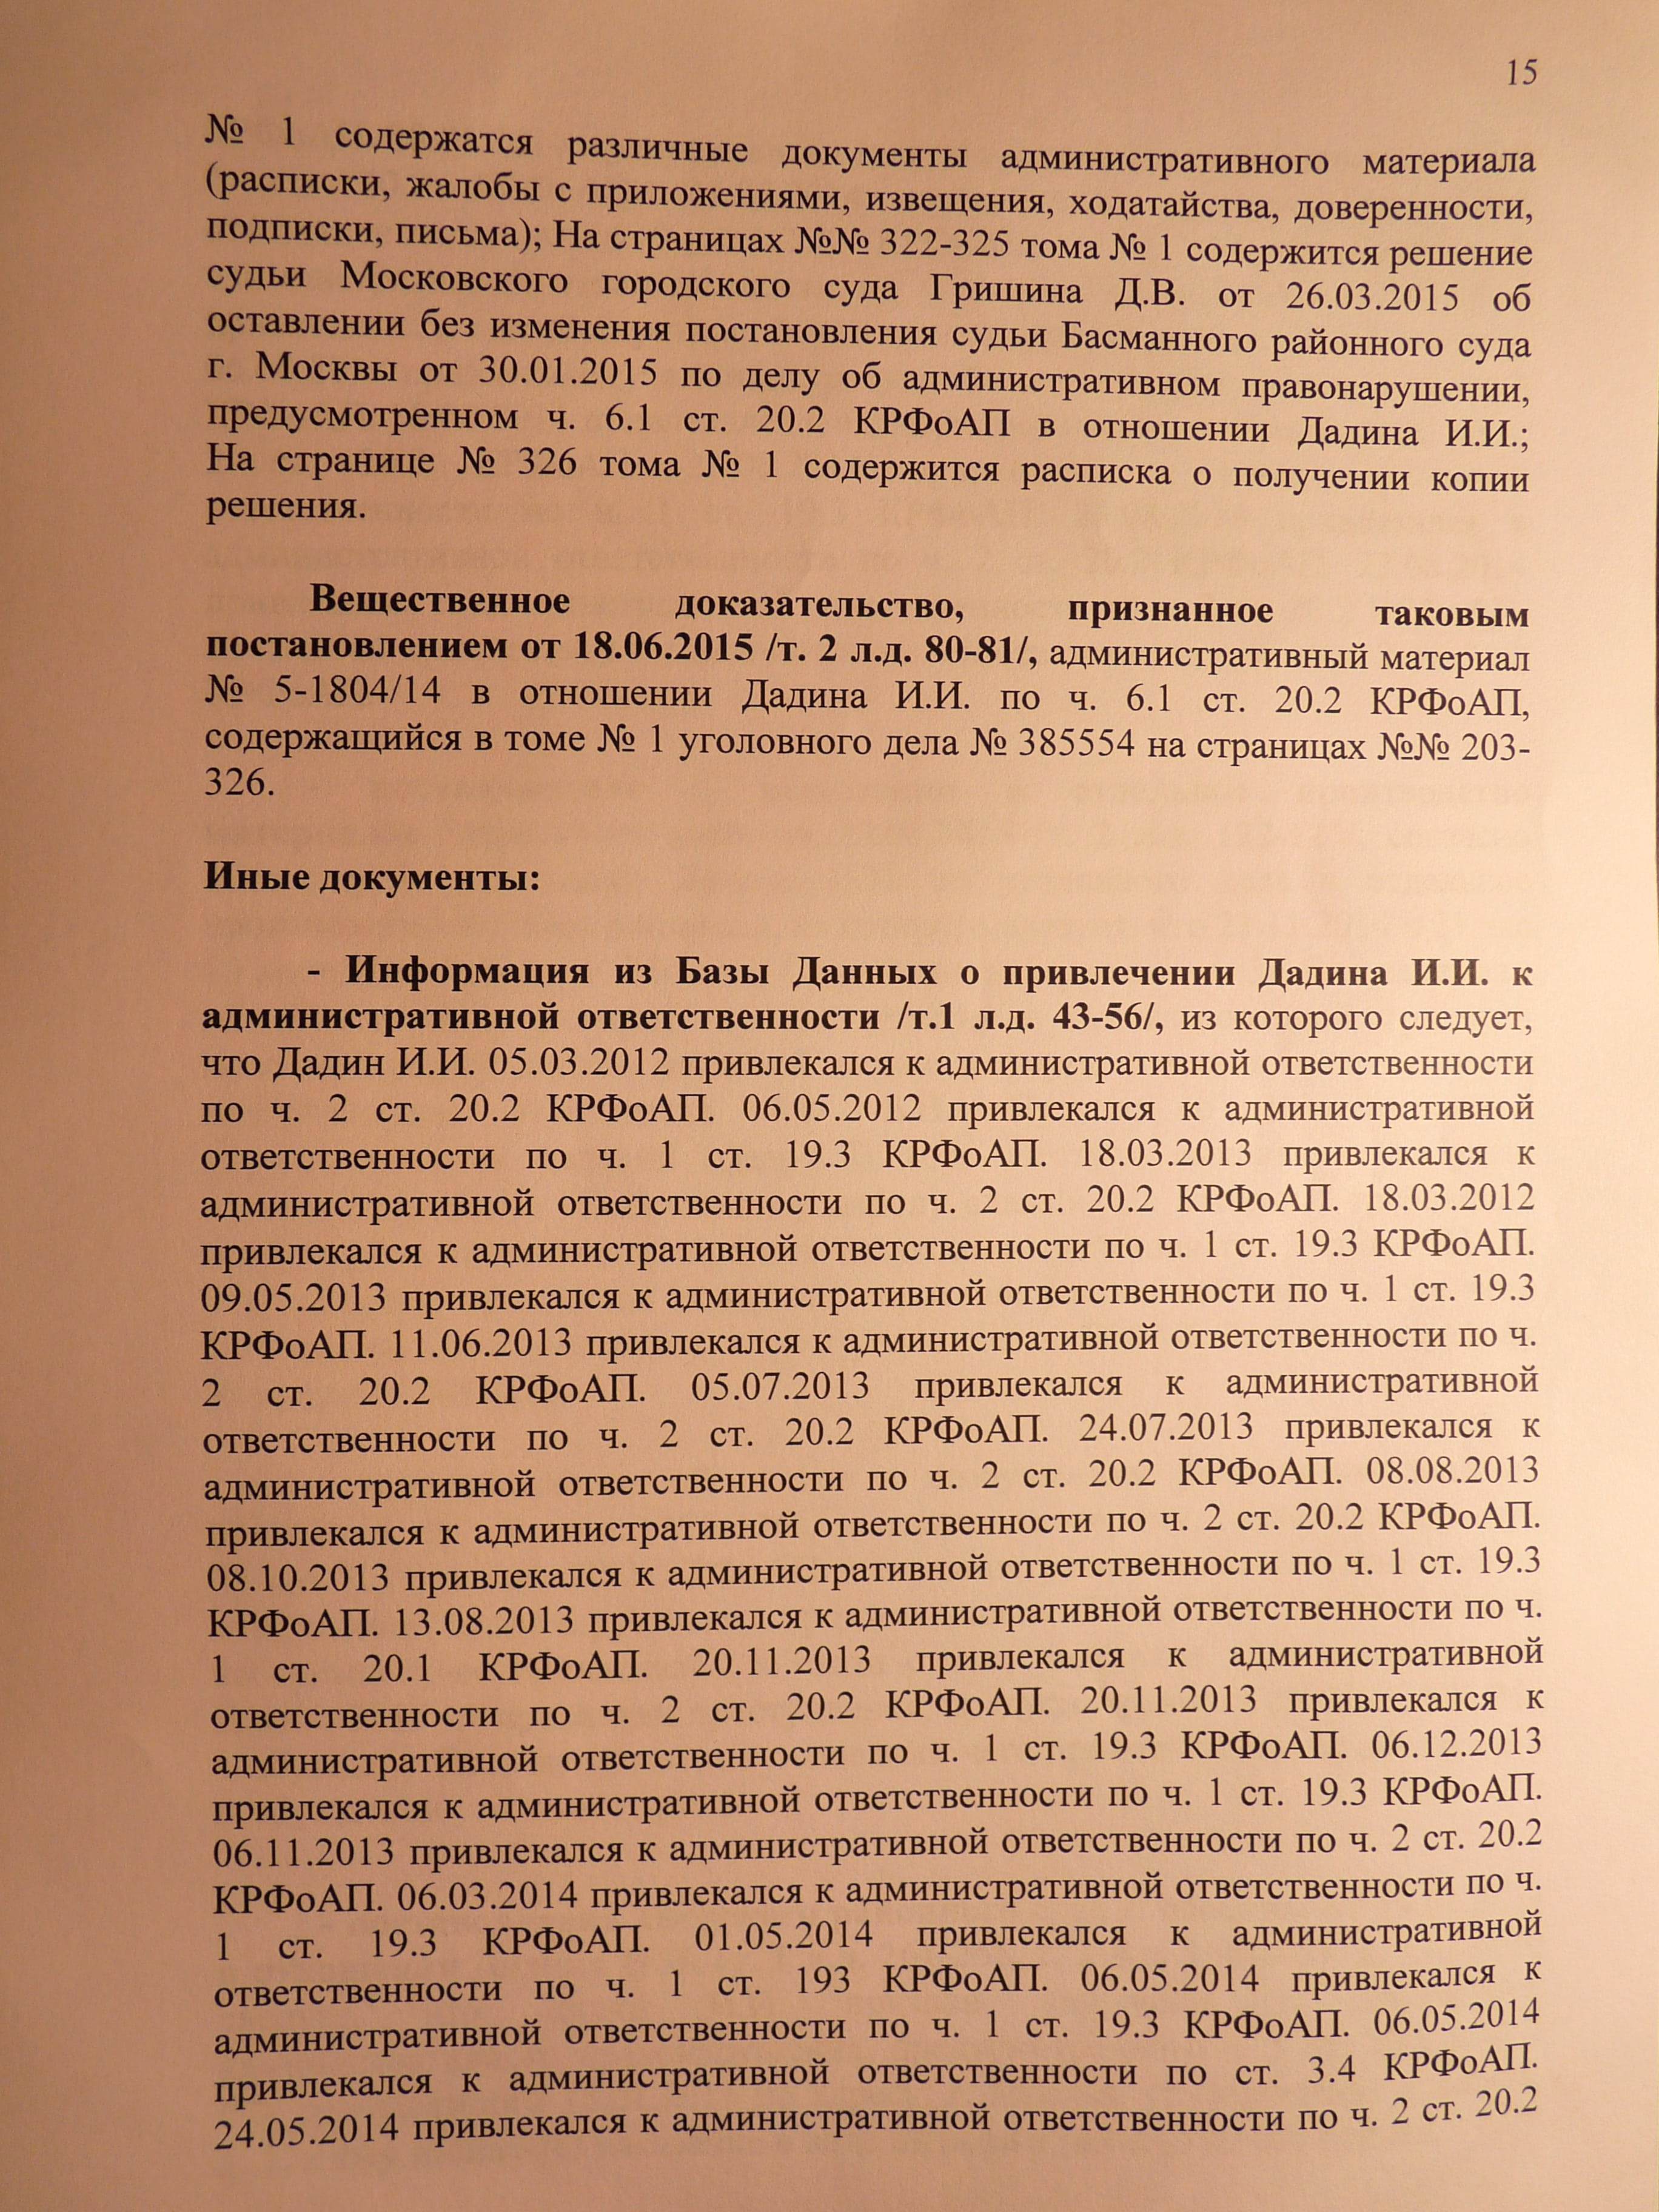 Information from the Database on bringing Dadin I. I. to administrative liability /vol.1 l.d. 43-56/, from which it follows …